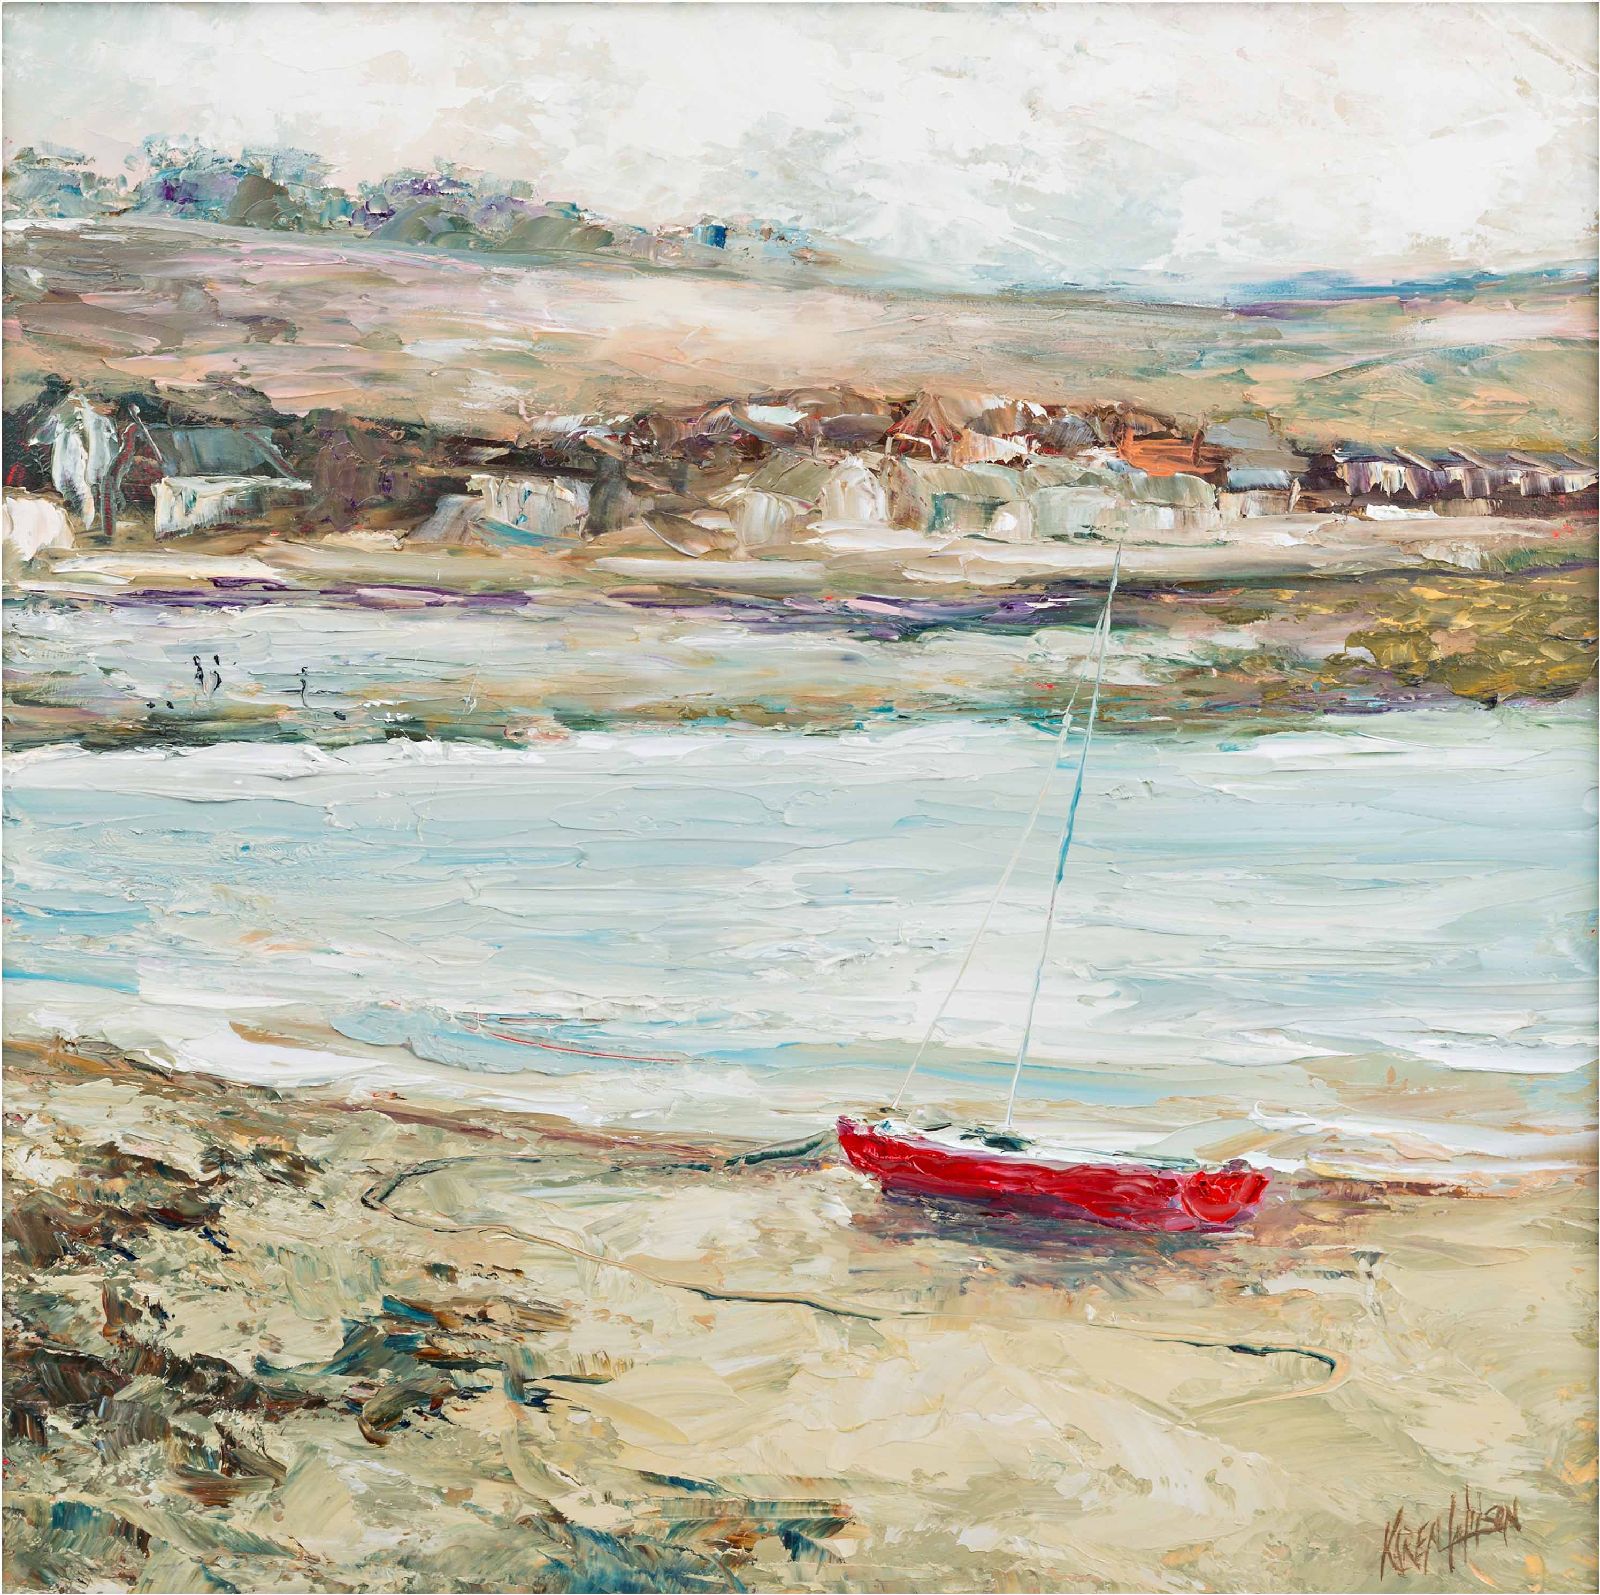 The Red Boat by Karen Wilson